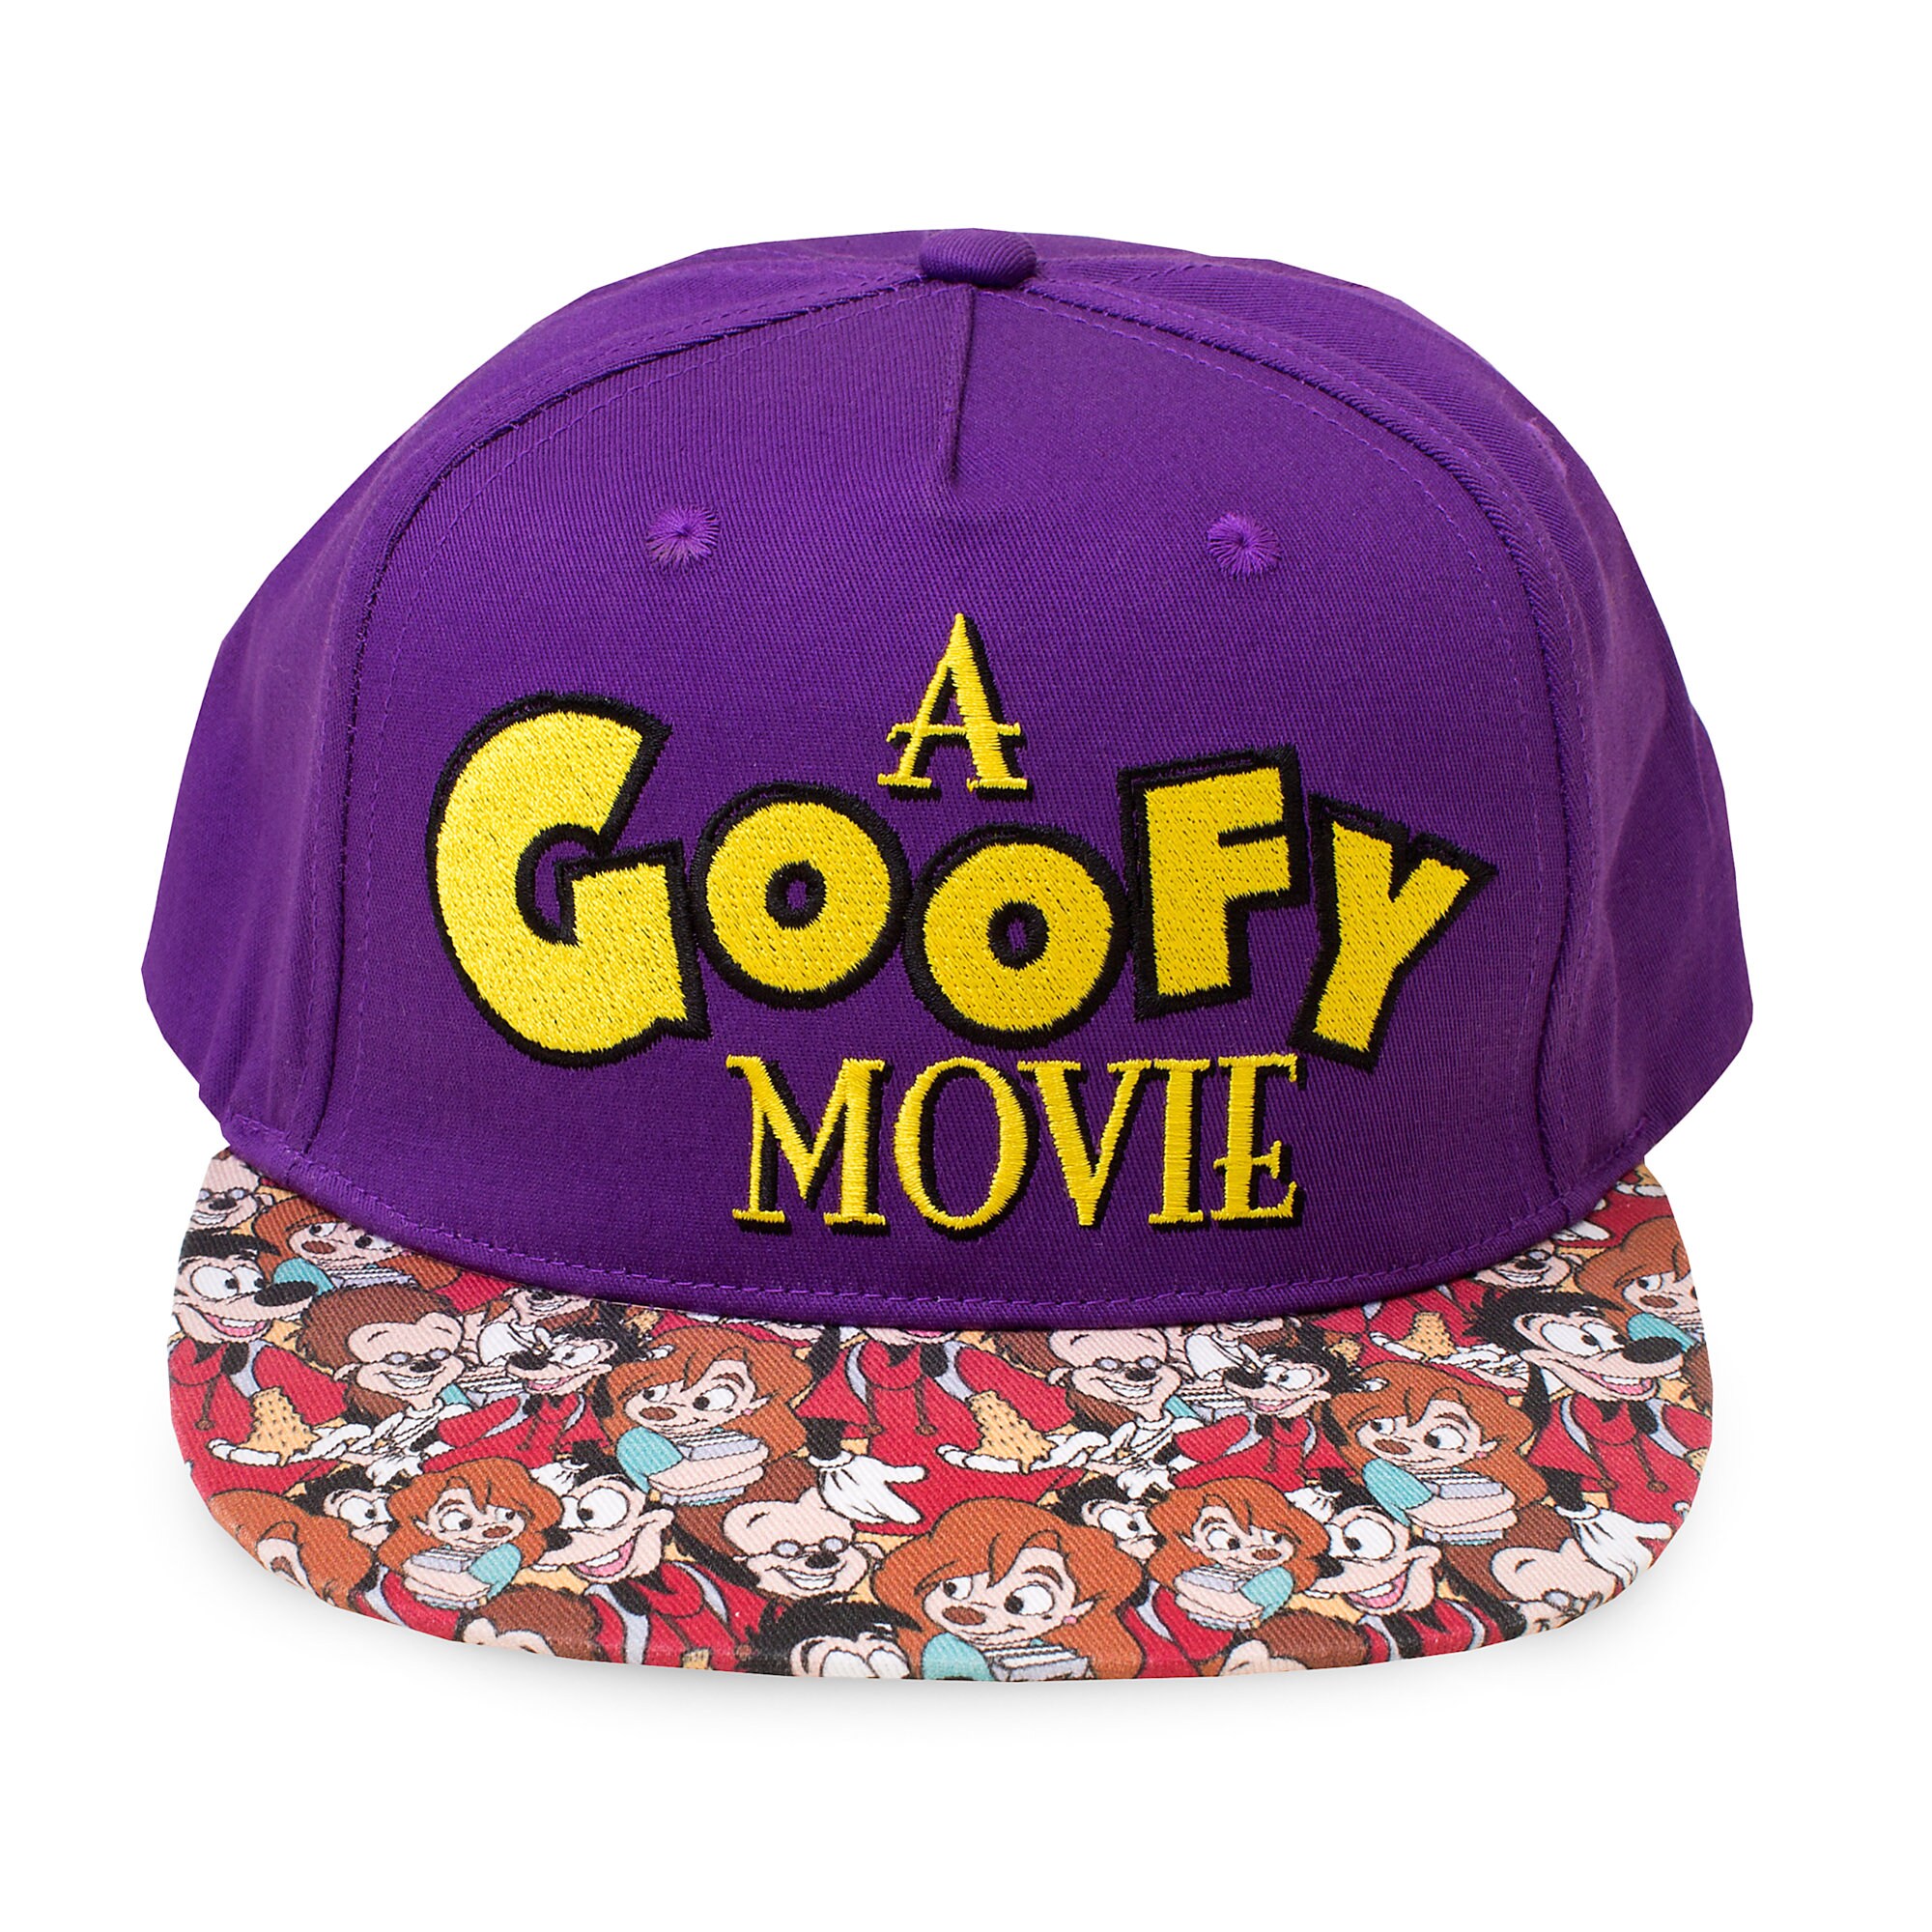 A Goofy Movie Baseball Cap for Adults by Cakeworthy